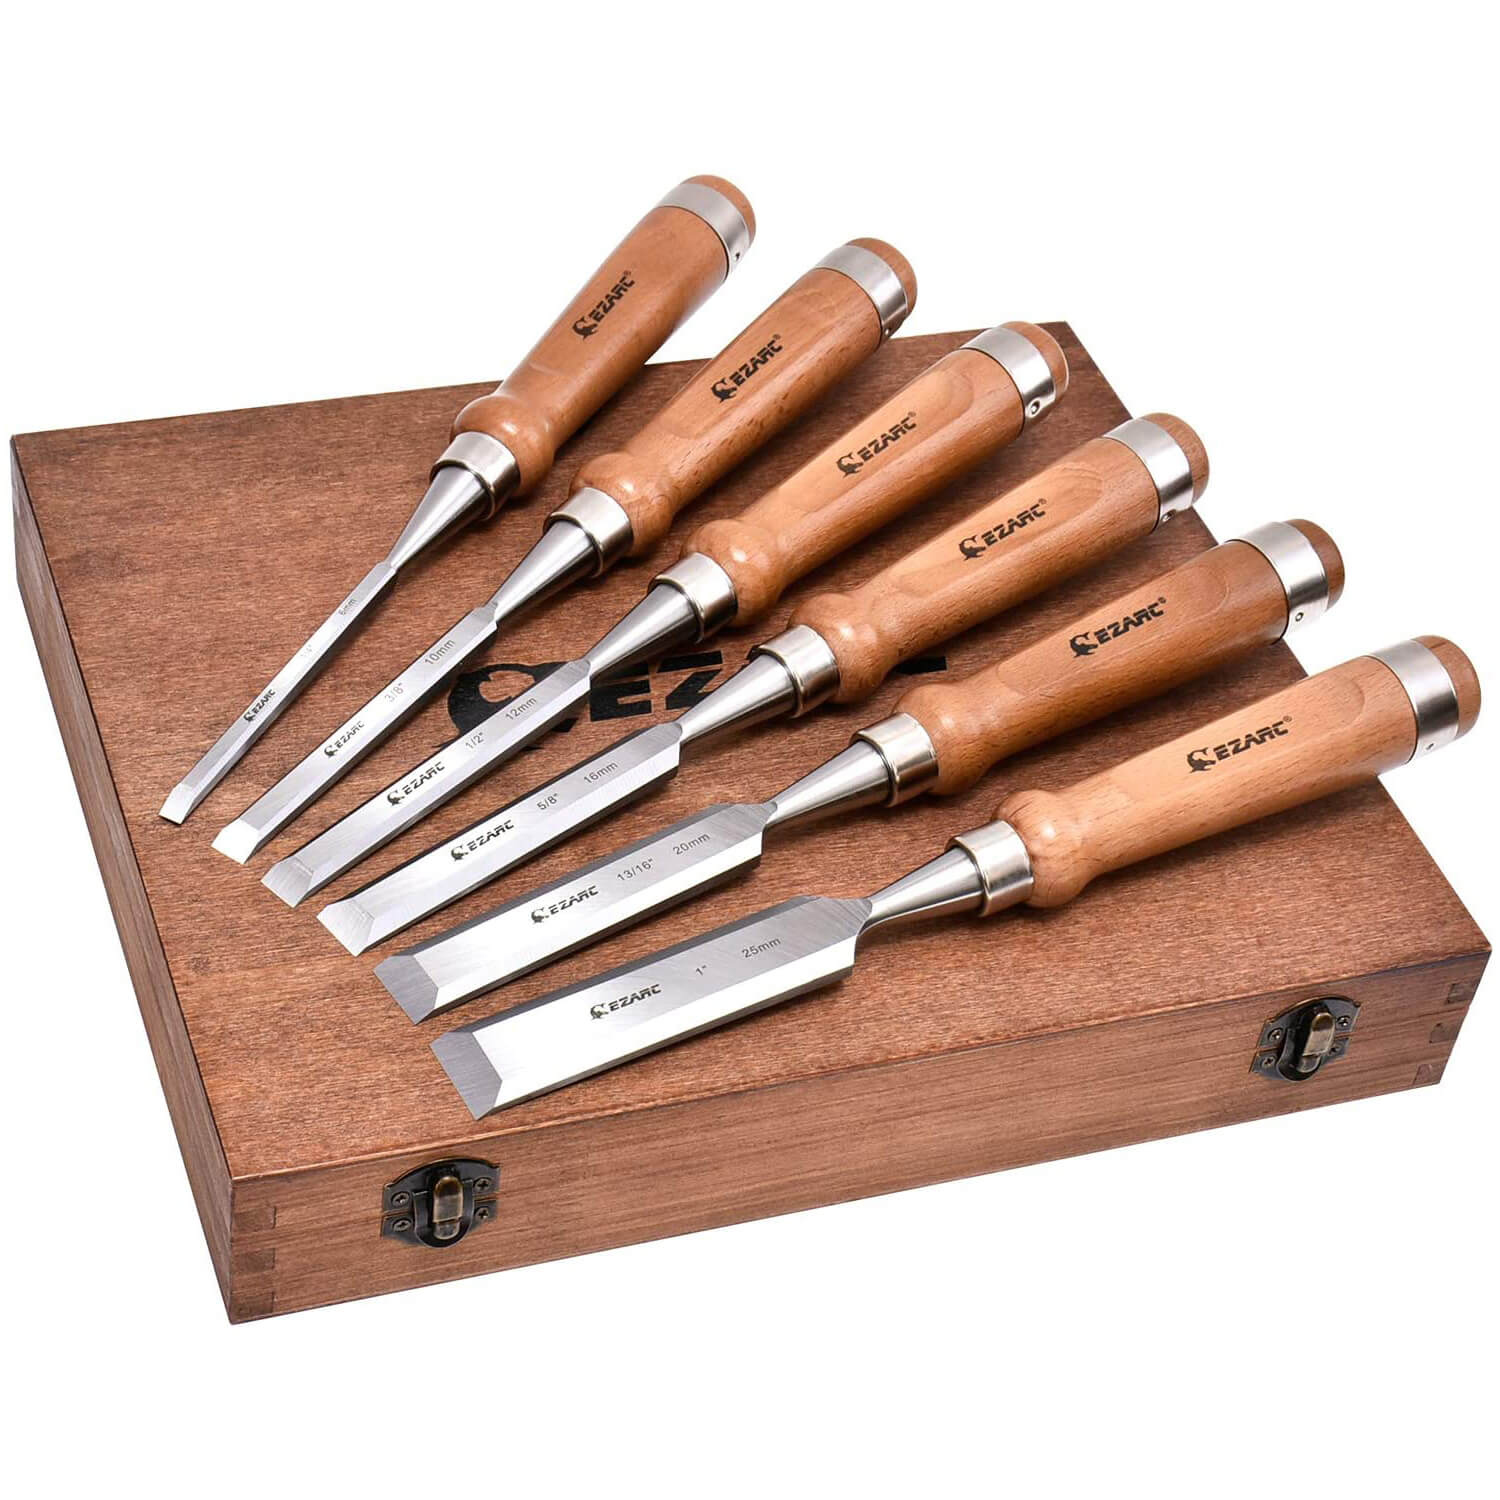 Professional left handed wood carving set with sharpening